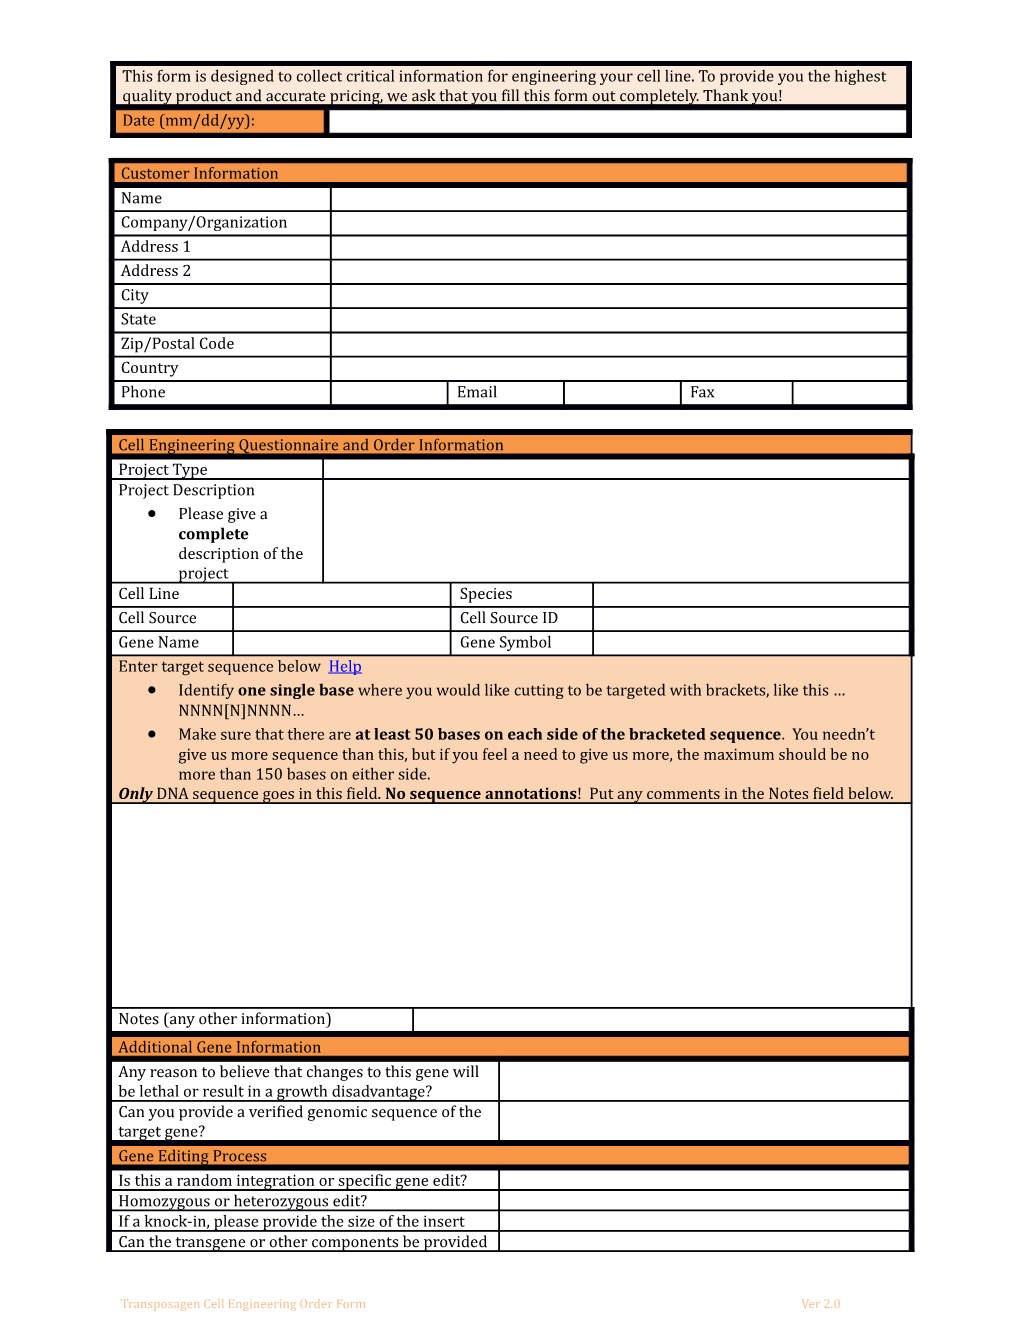 This Form Is Designed to Collect Critical Information for Engineering Your Cell Line